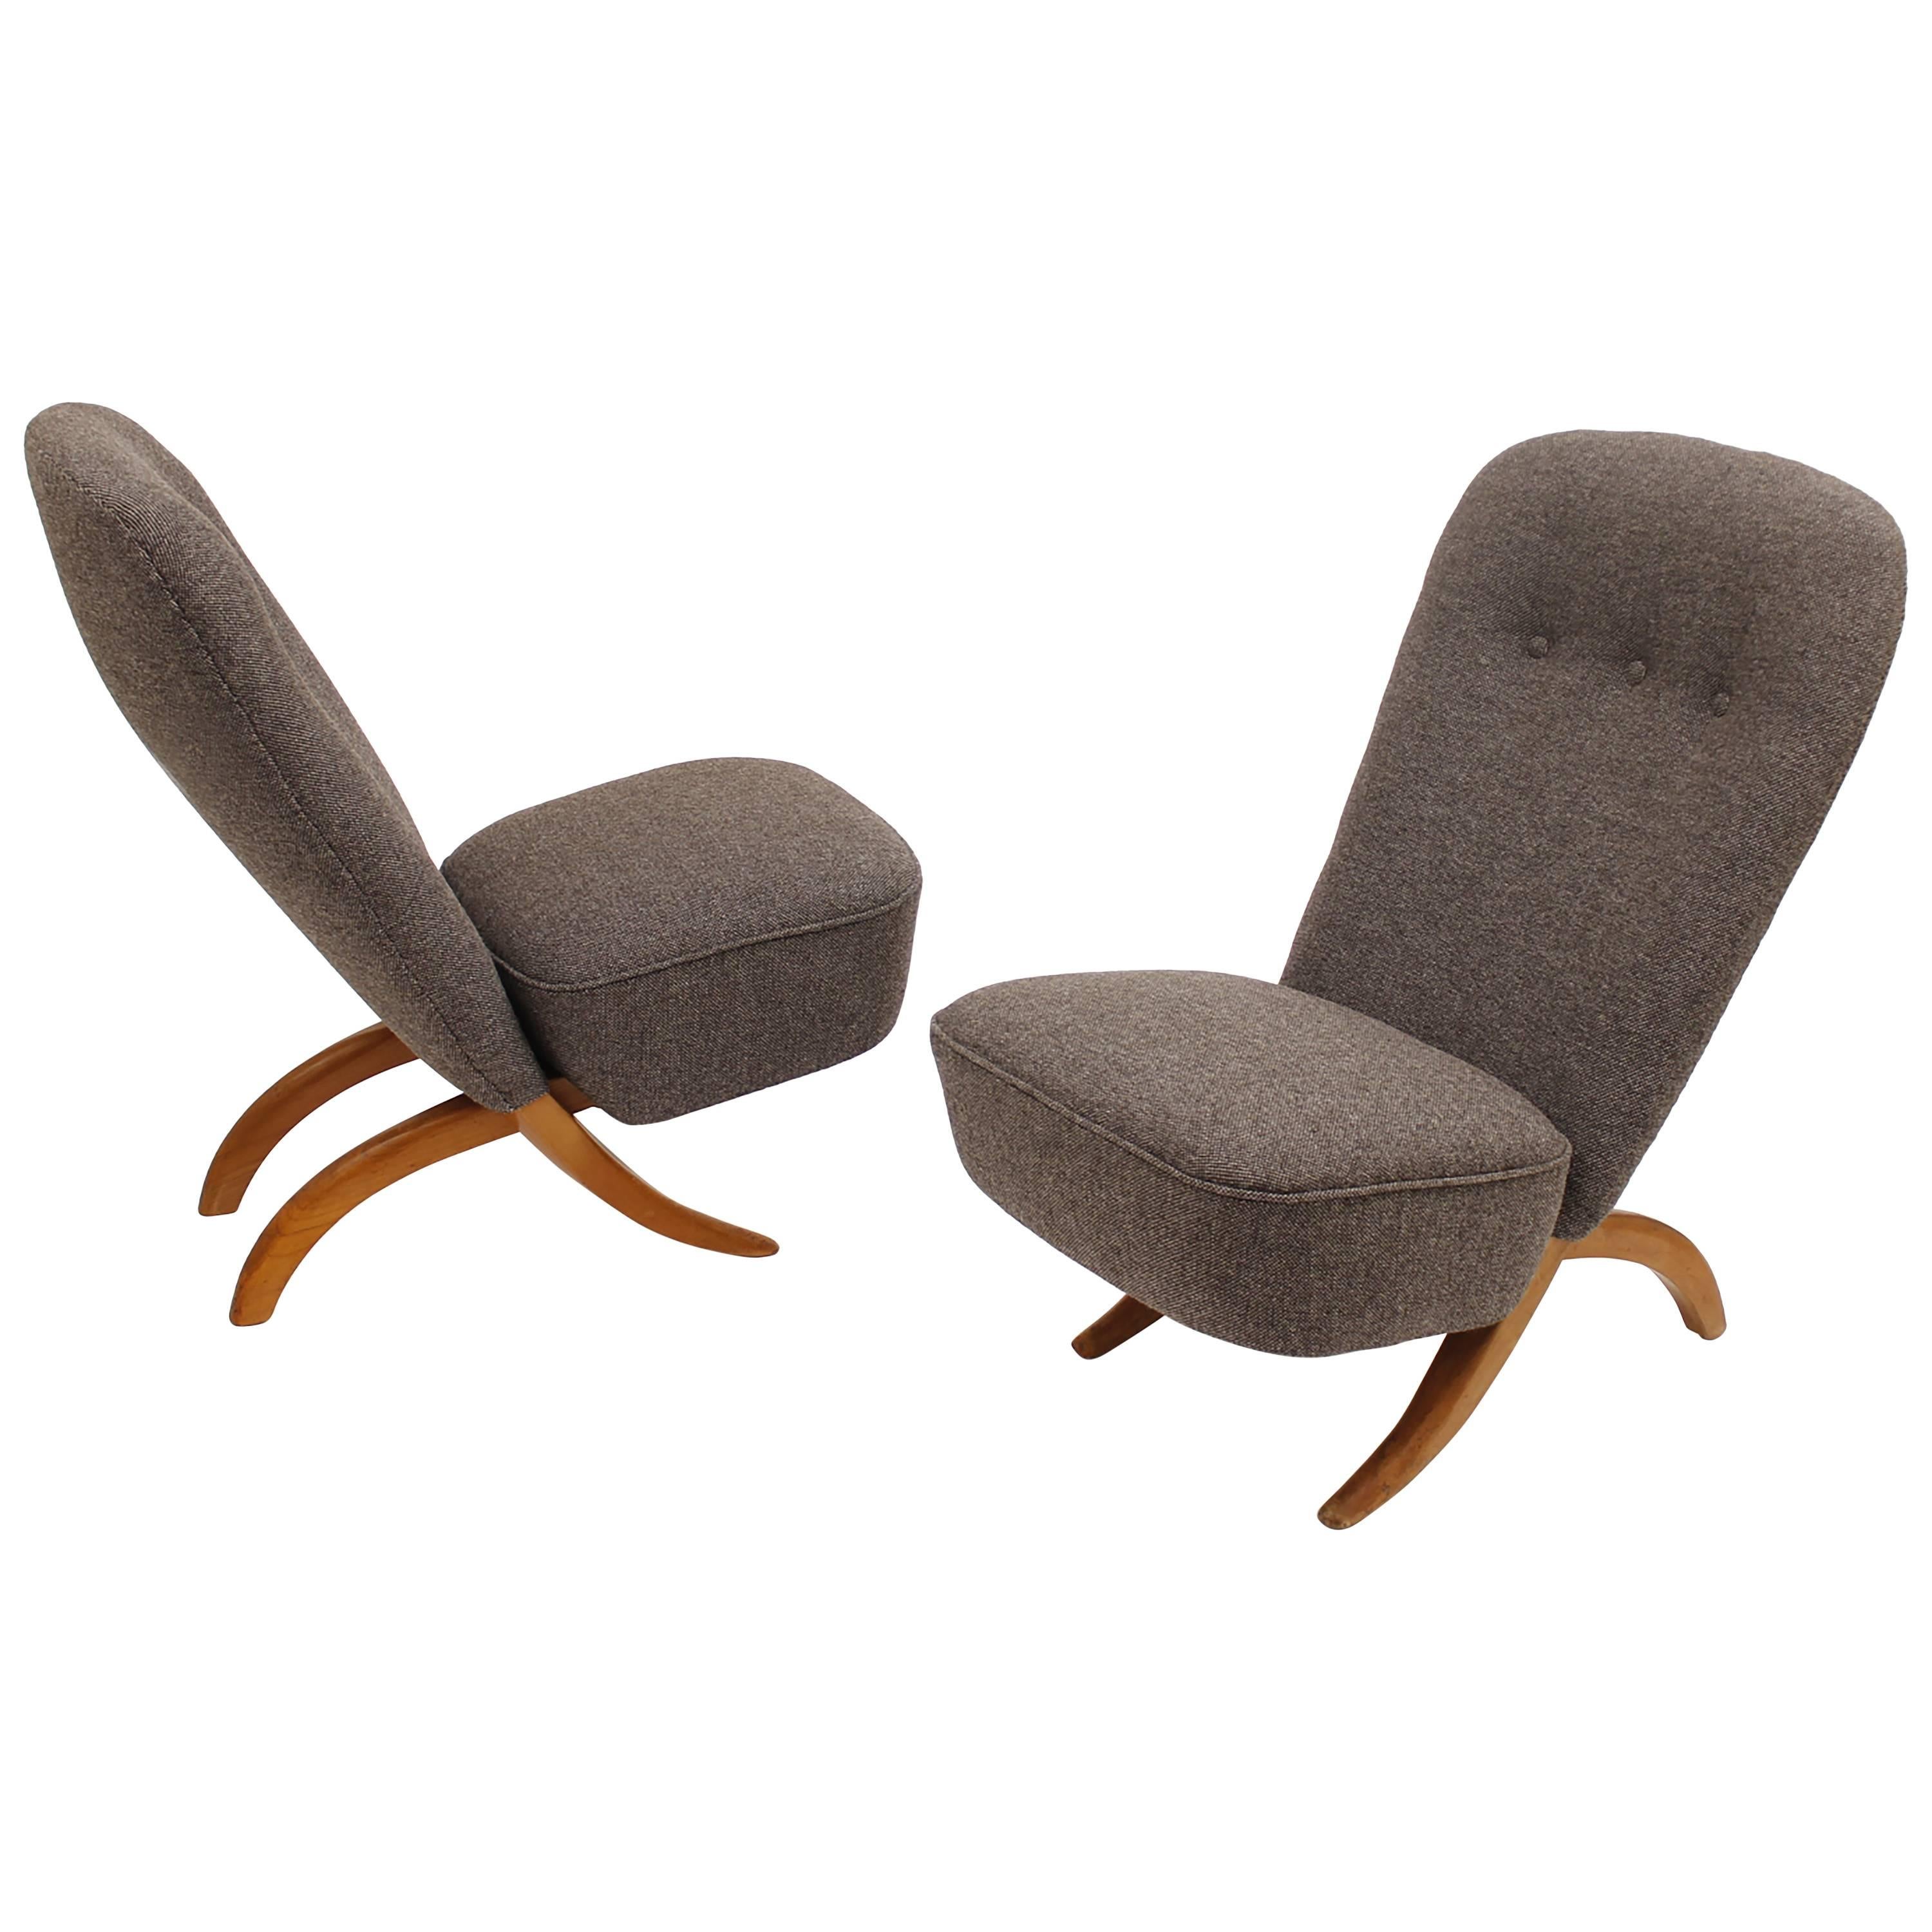 Pair of Low Chairs "Congo" Designed by Theo Ruth for Artifort, circa 1950